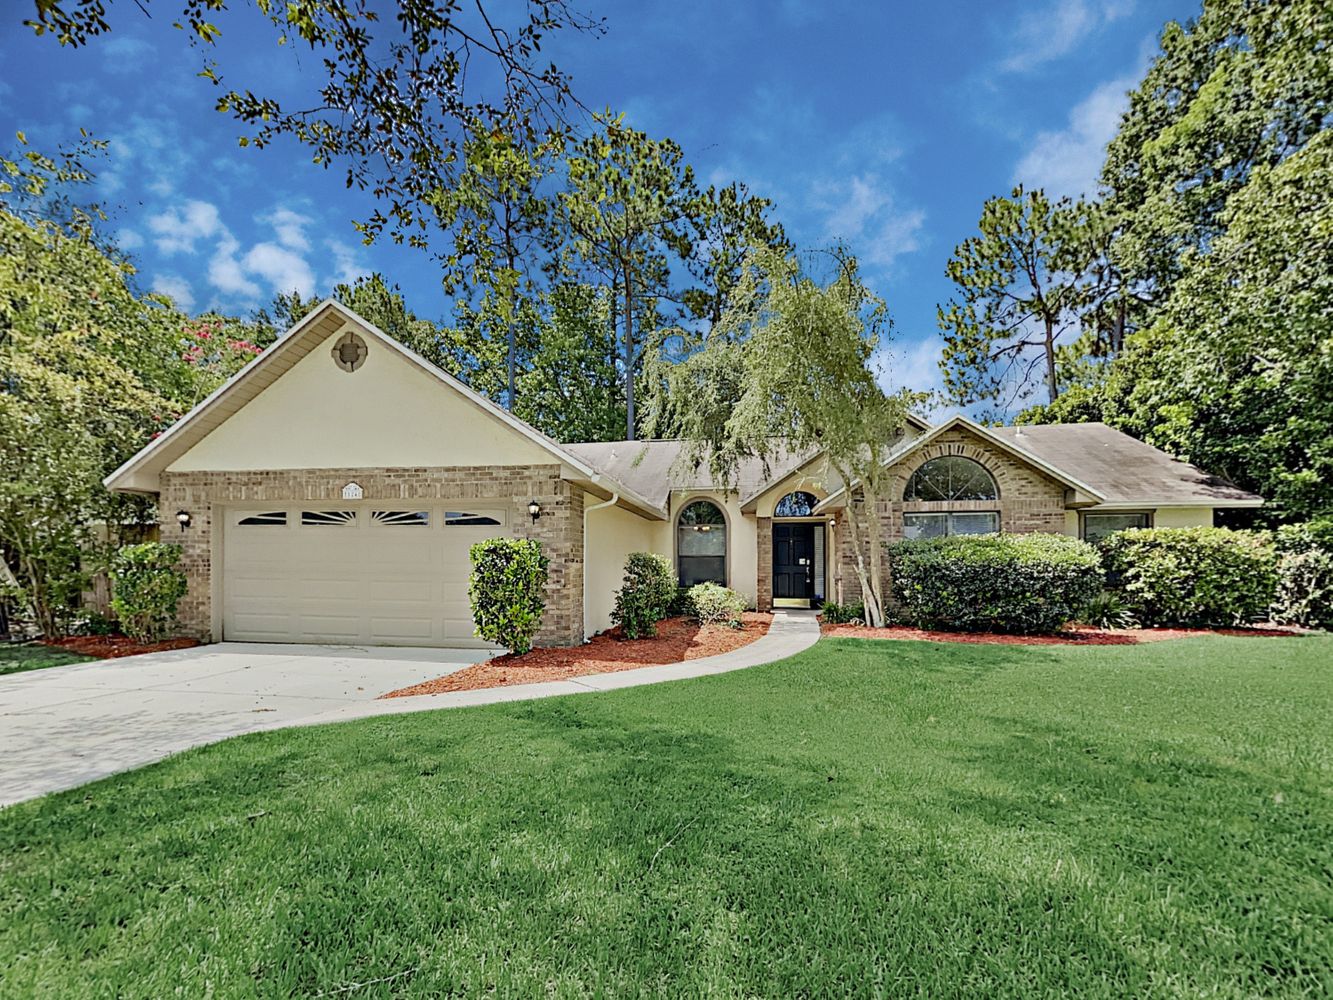 Beautiful home with a two-car garage and large lawn at Invitation Homes Jacksonville.